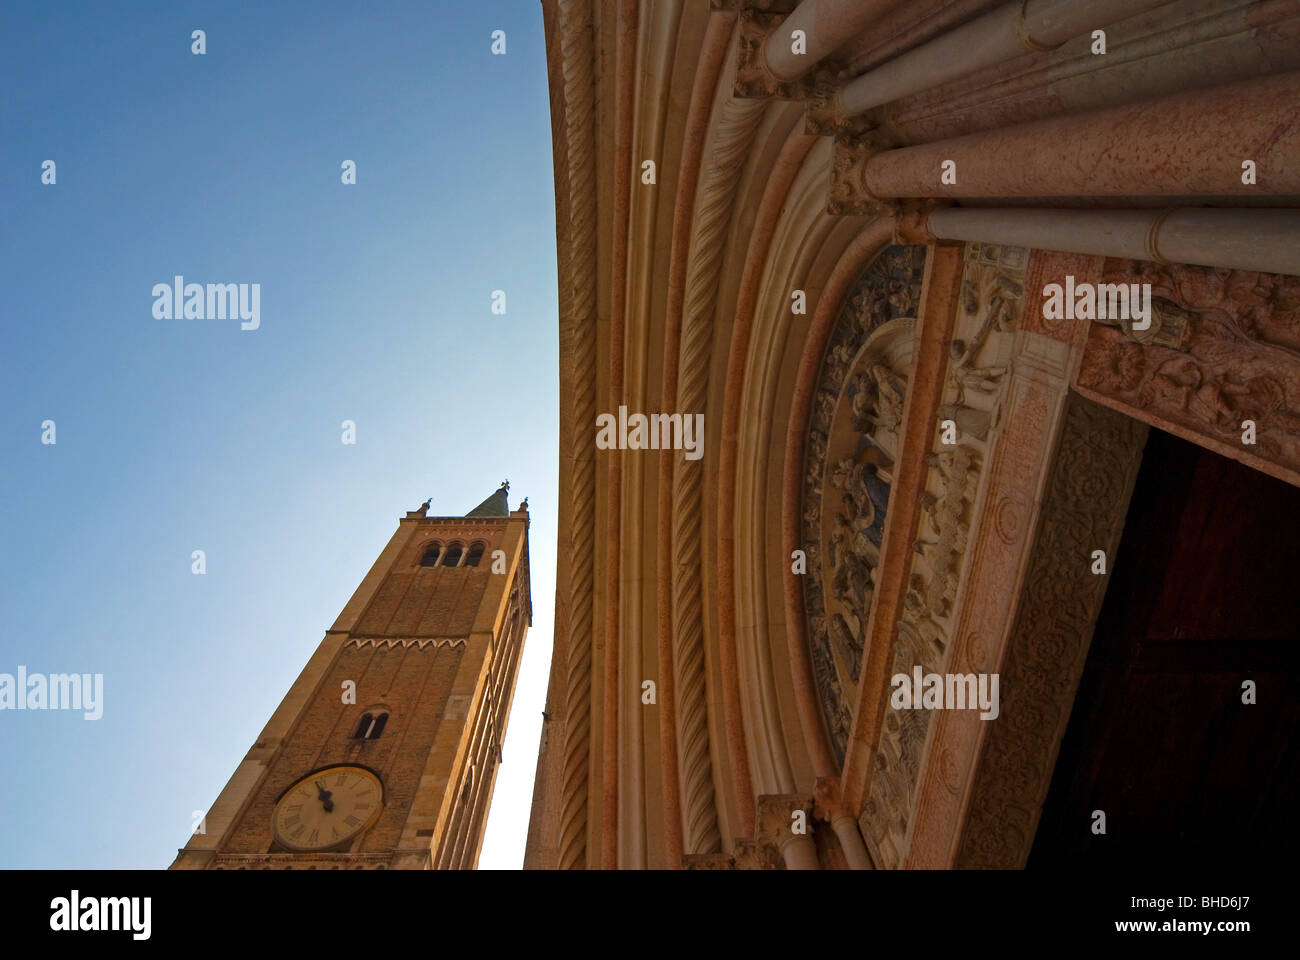 The Duomo's Bell Tower and the Baptistry, Parma, Emilia Romagna, Italy, Europe Stock Photo